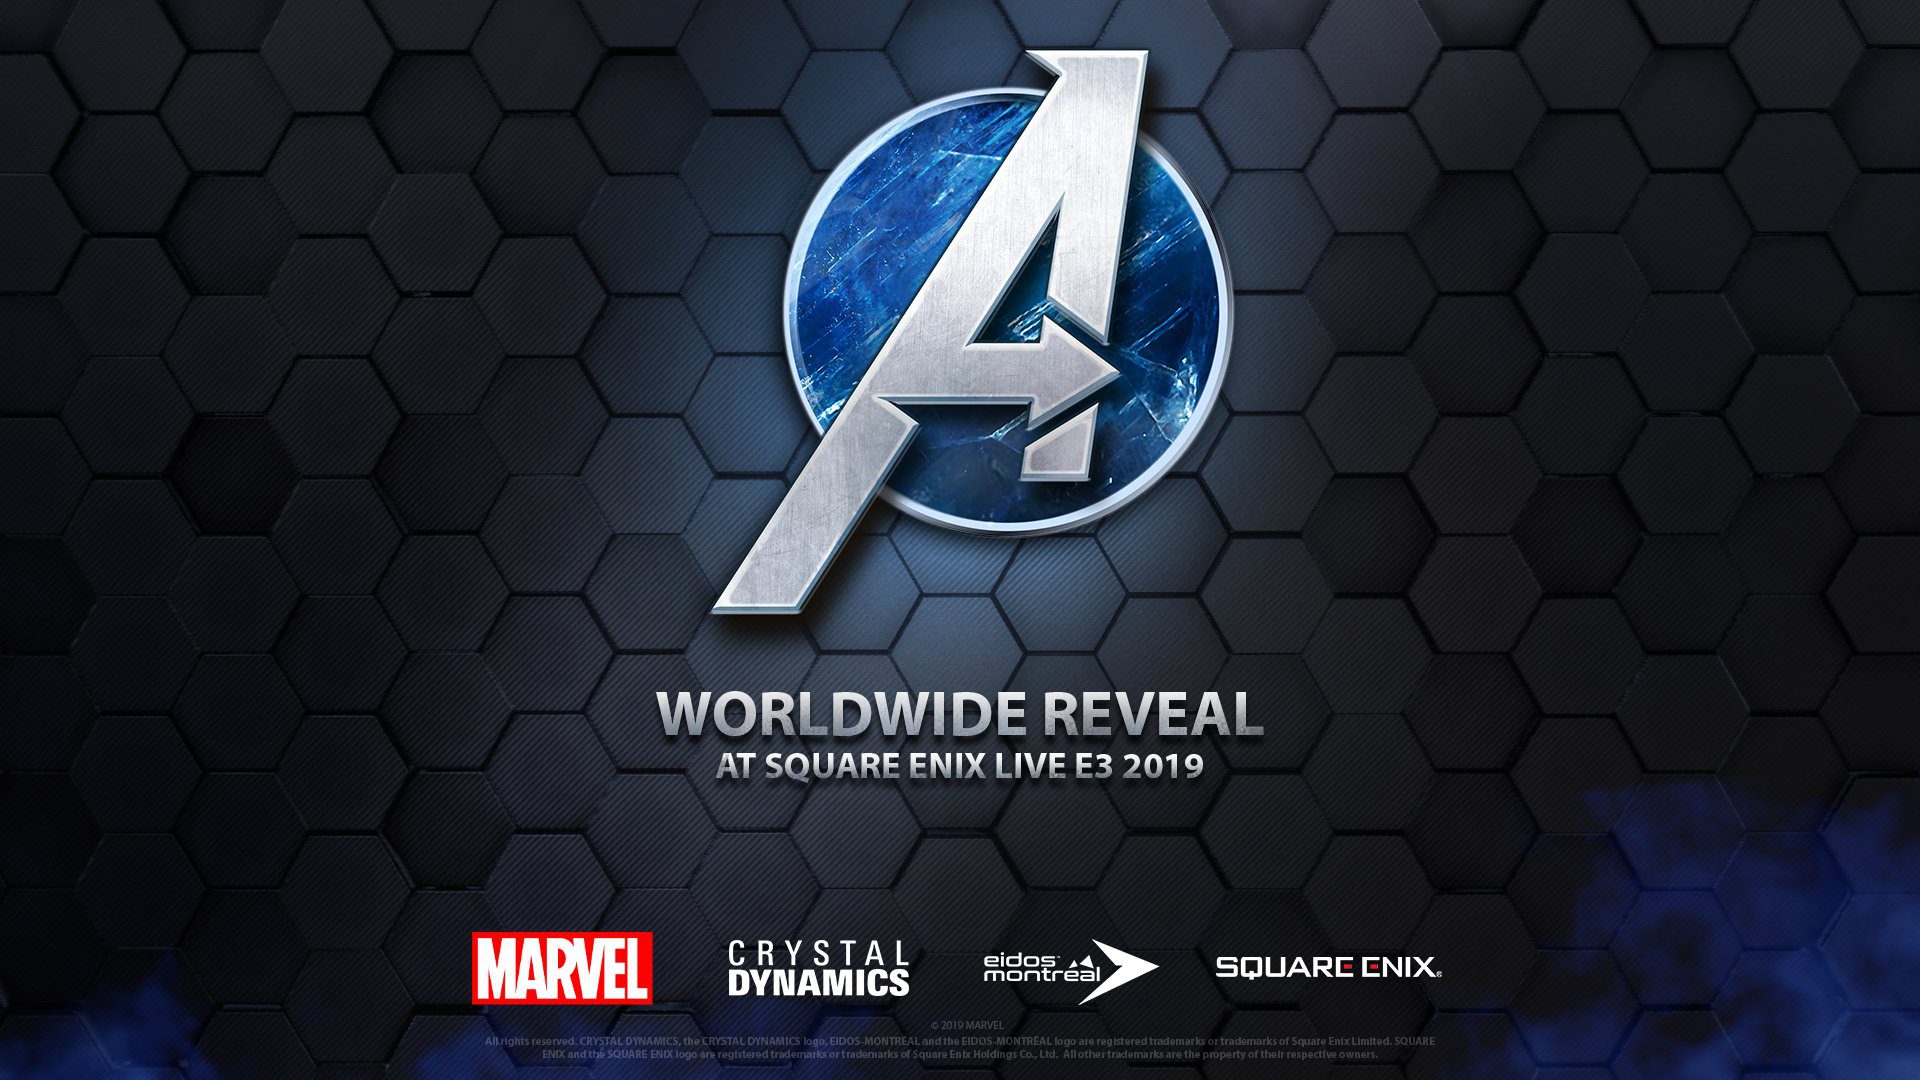 Square Enix To Reveal Marvel’s Avengers Game At E3